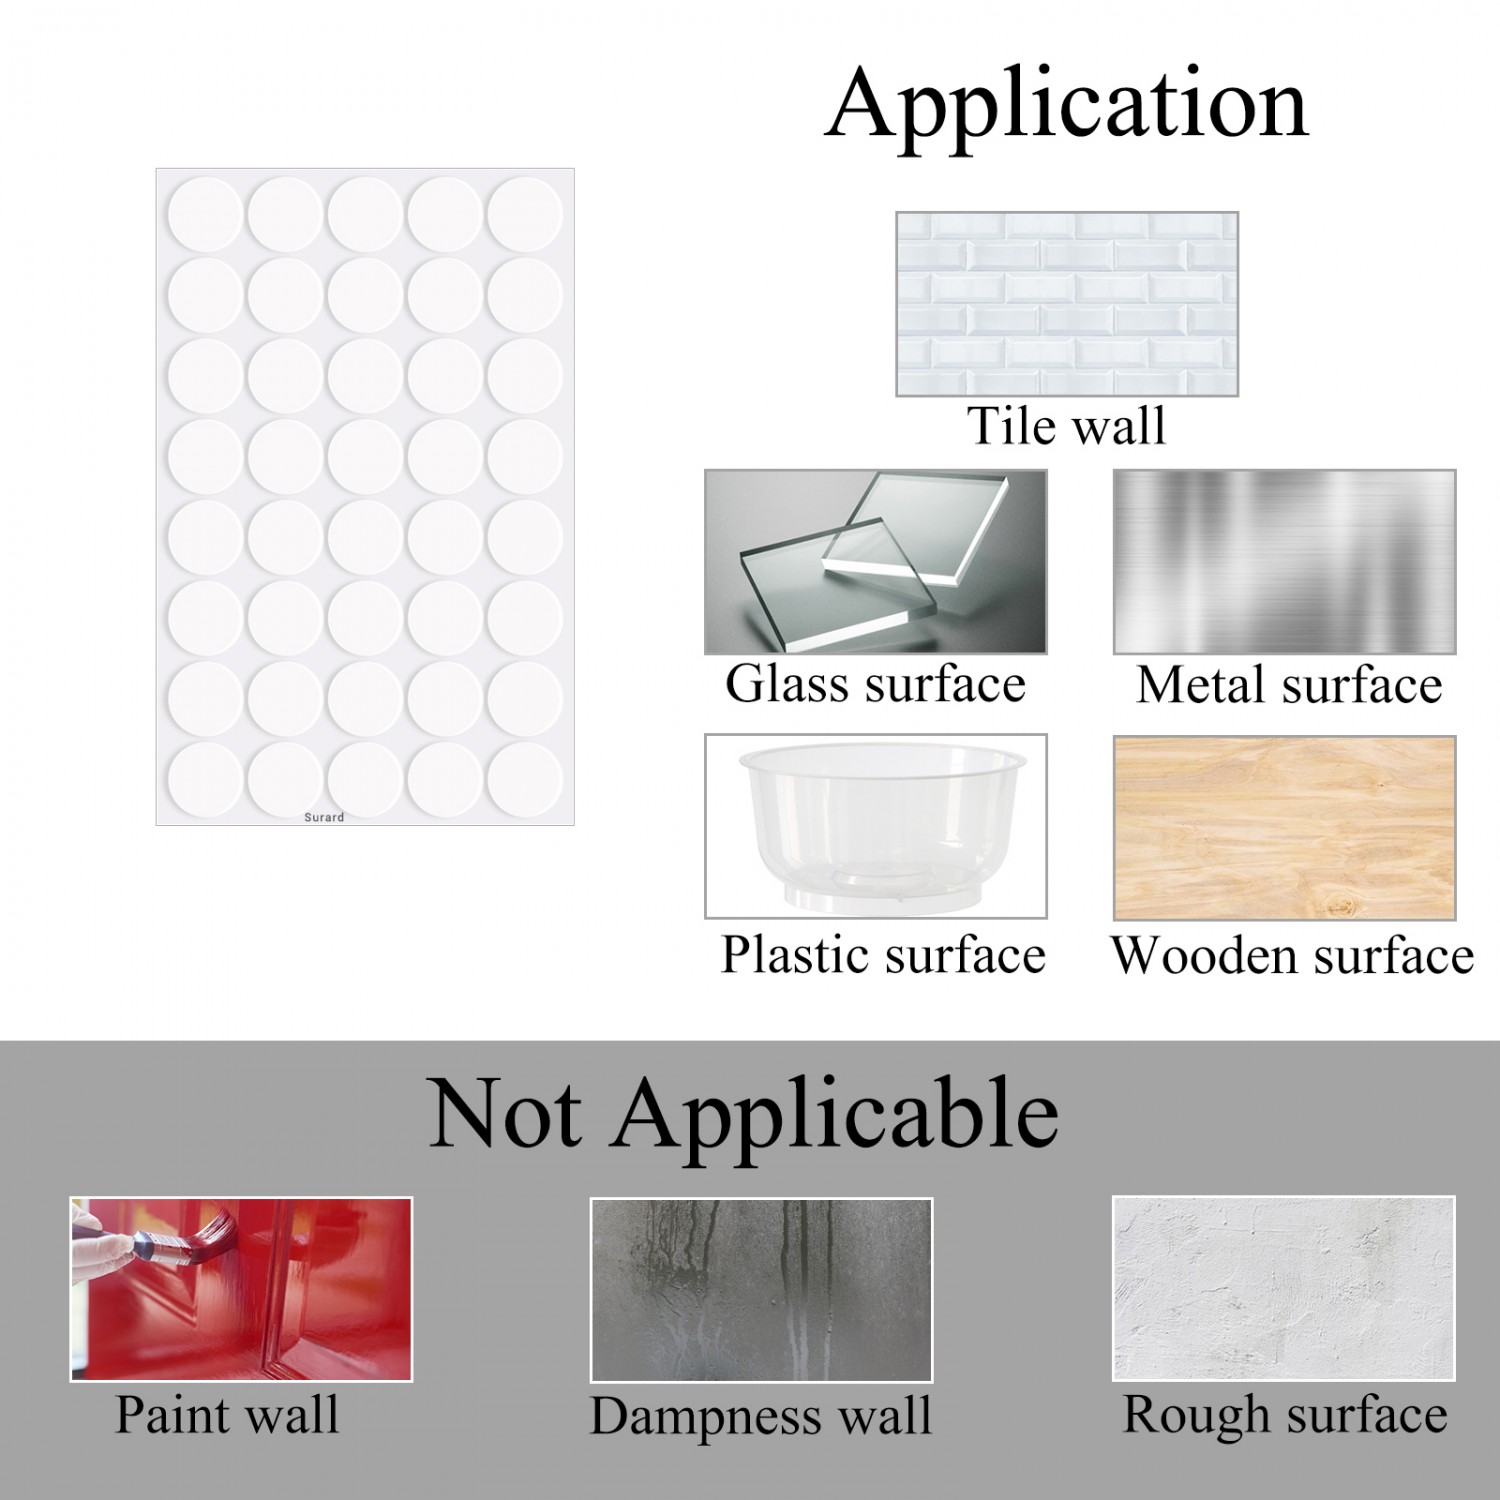 Clear Round Reusable Mounting Stickers Transparent Tacky Glue Tape for Wall Hanging Pictures 300 Pcs 6mm/0.24” Adhesive Dots Surard Poster Putty Double Sided Removable Sticky Tack 